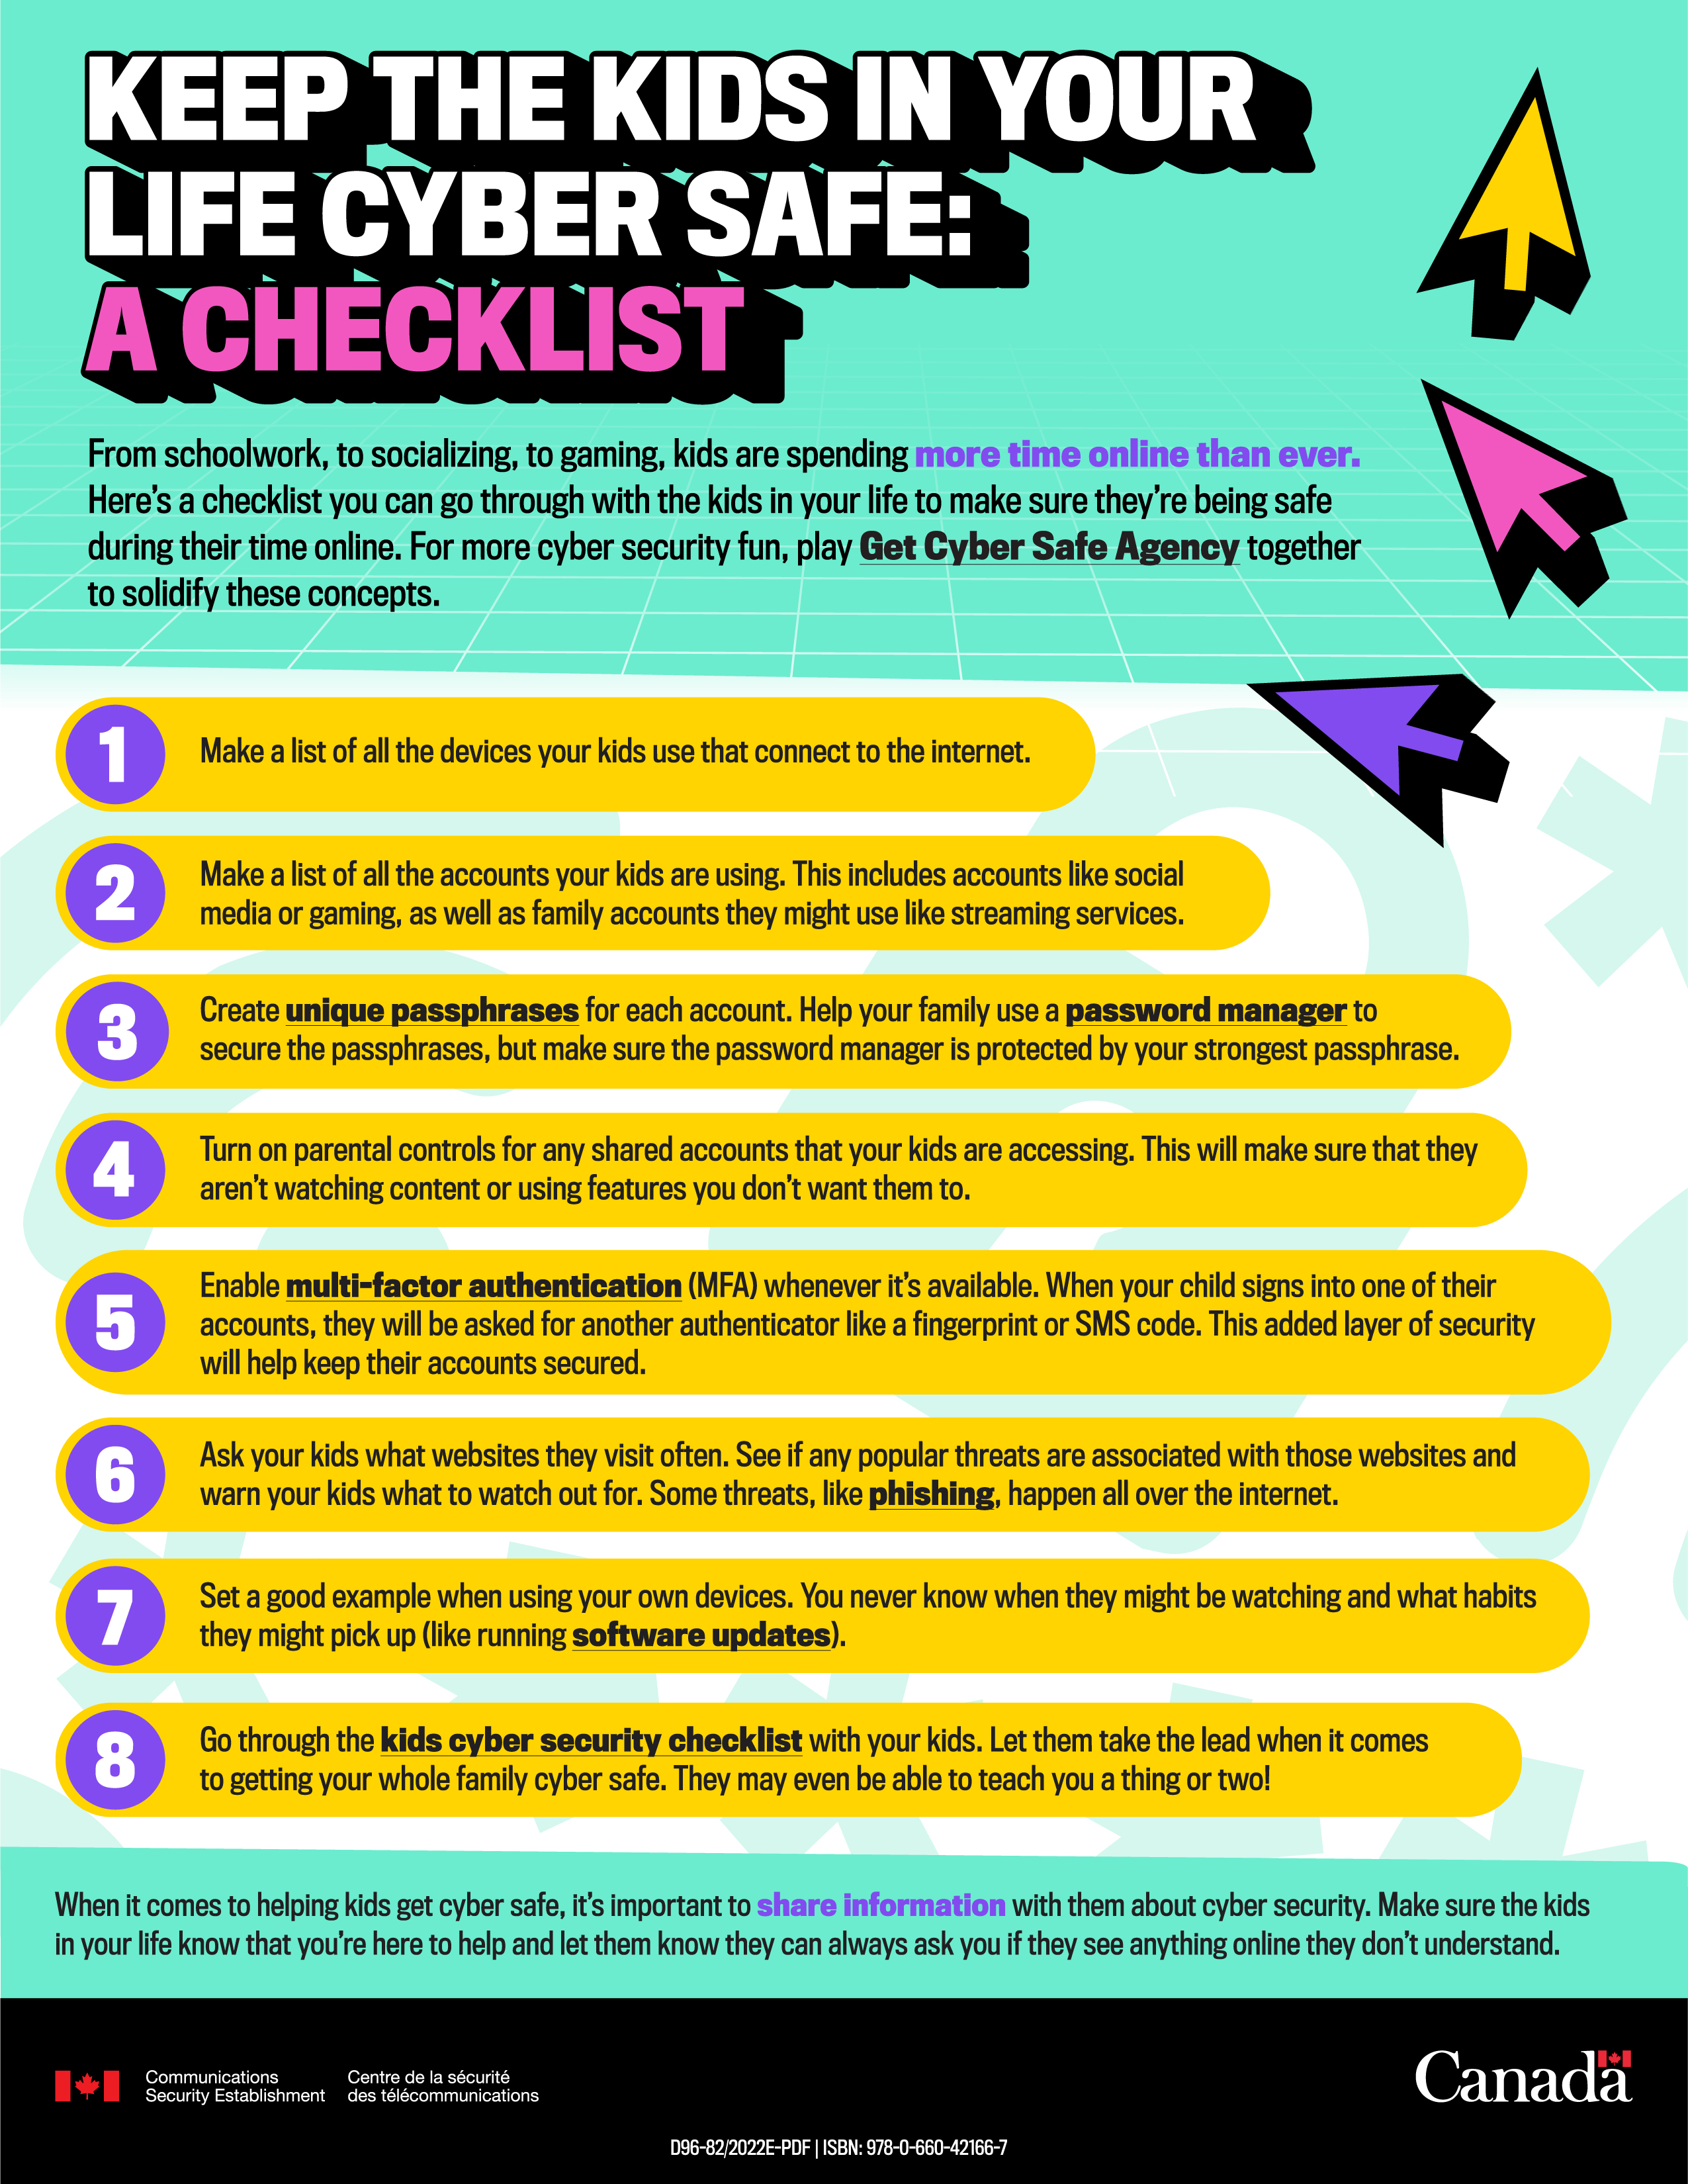 Keep the kids in your life cyber safe: a checklist - Long description immediately follows